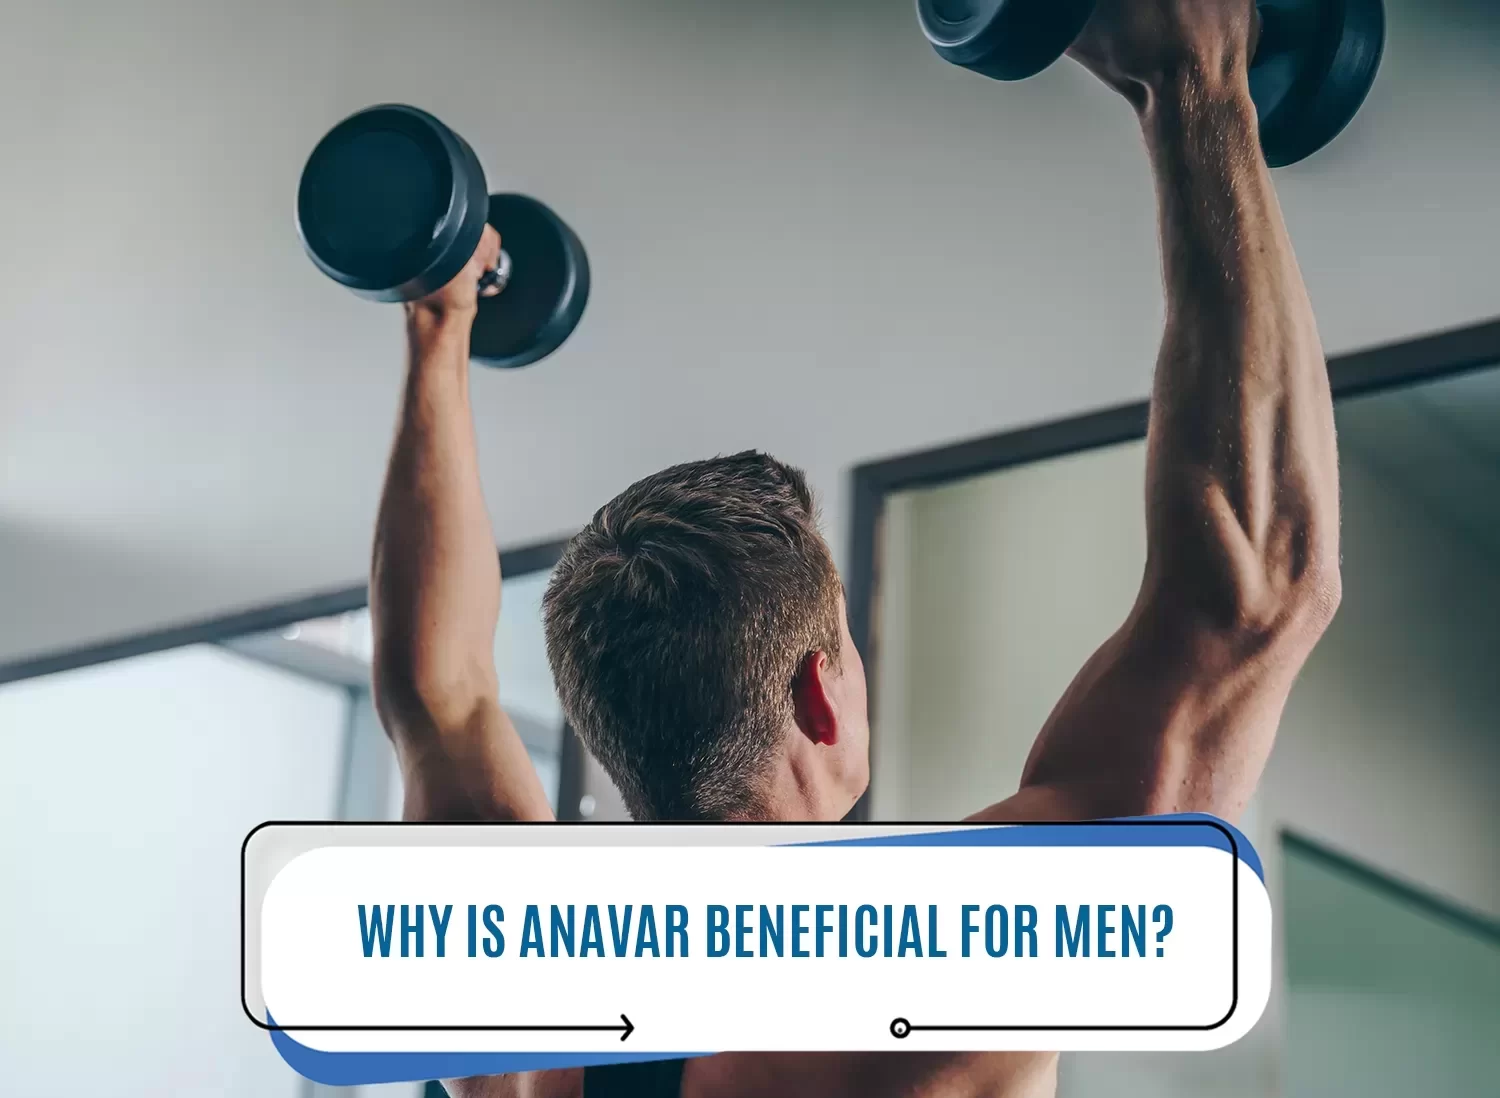 Why is Anavar beneficial